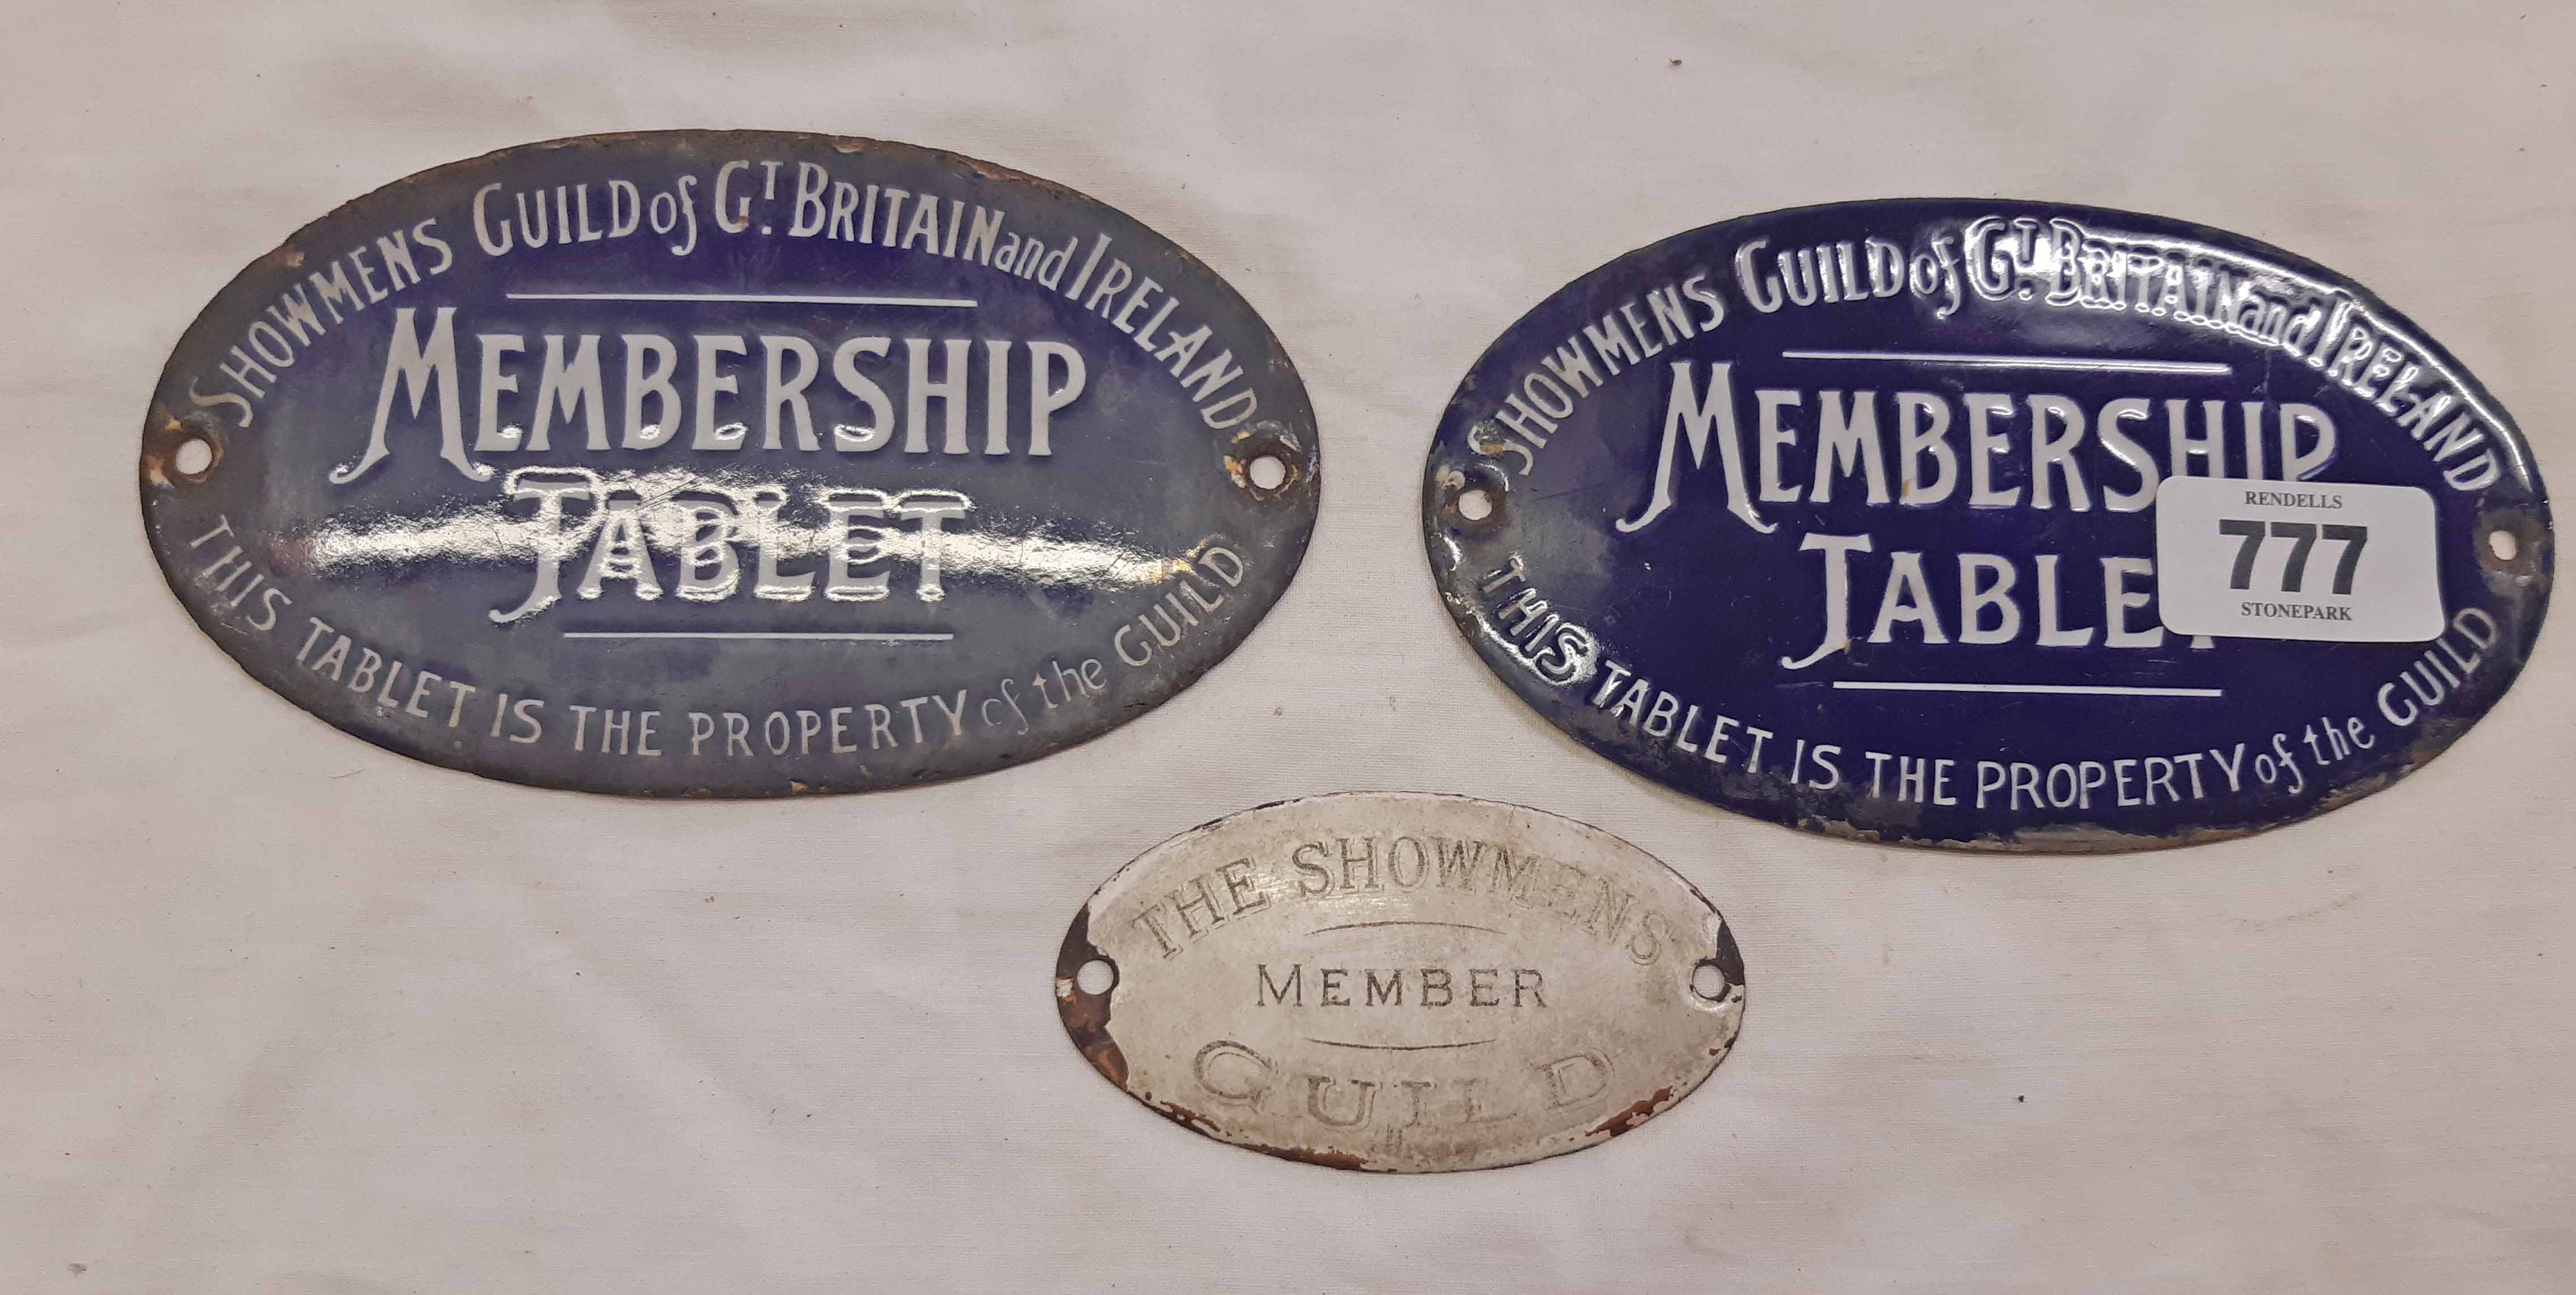 Two blue enamel Showmens Guild of Gt. Britain and Ireland membership tablets with white